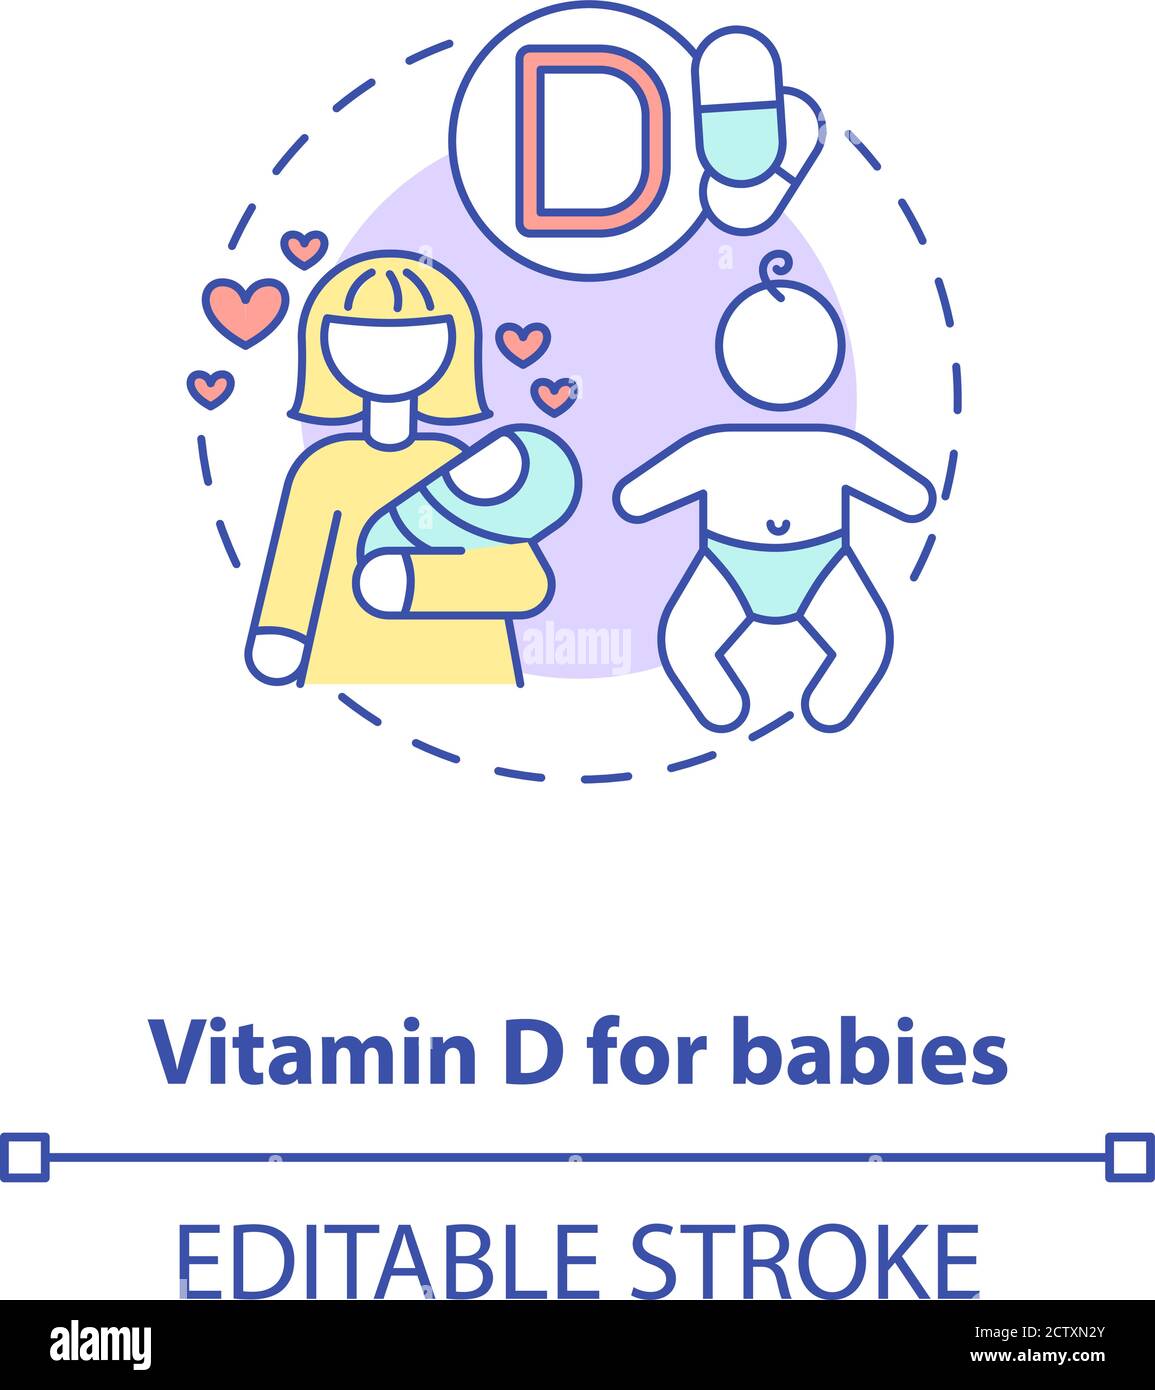 Vitamin D for babies concept icon Stock Vector